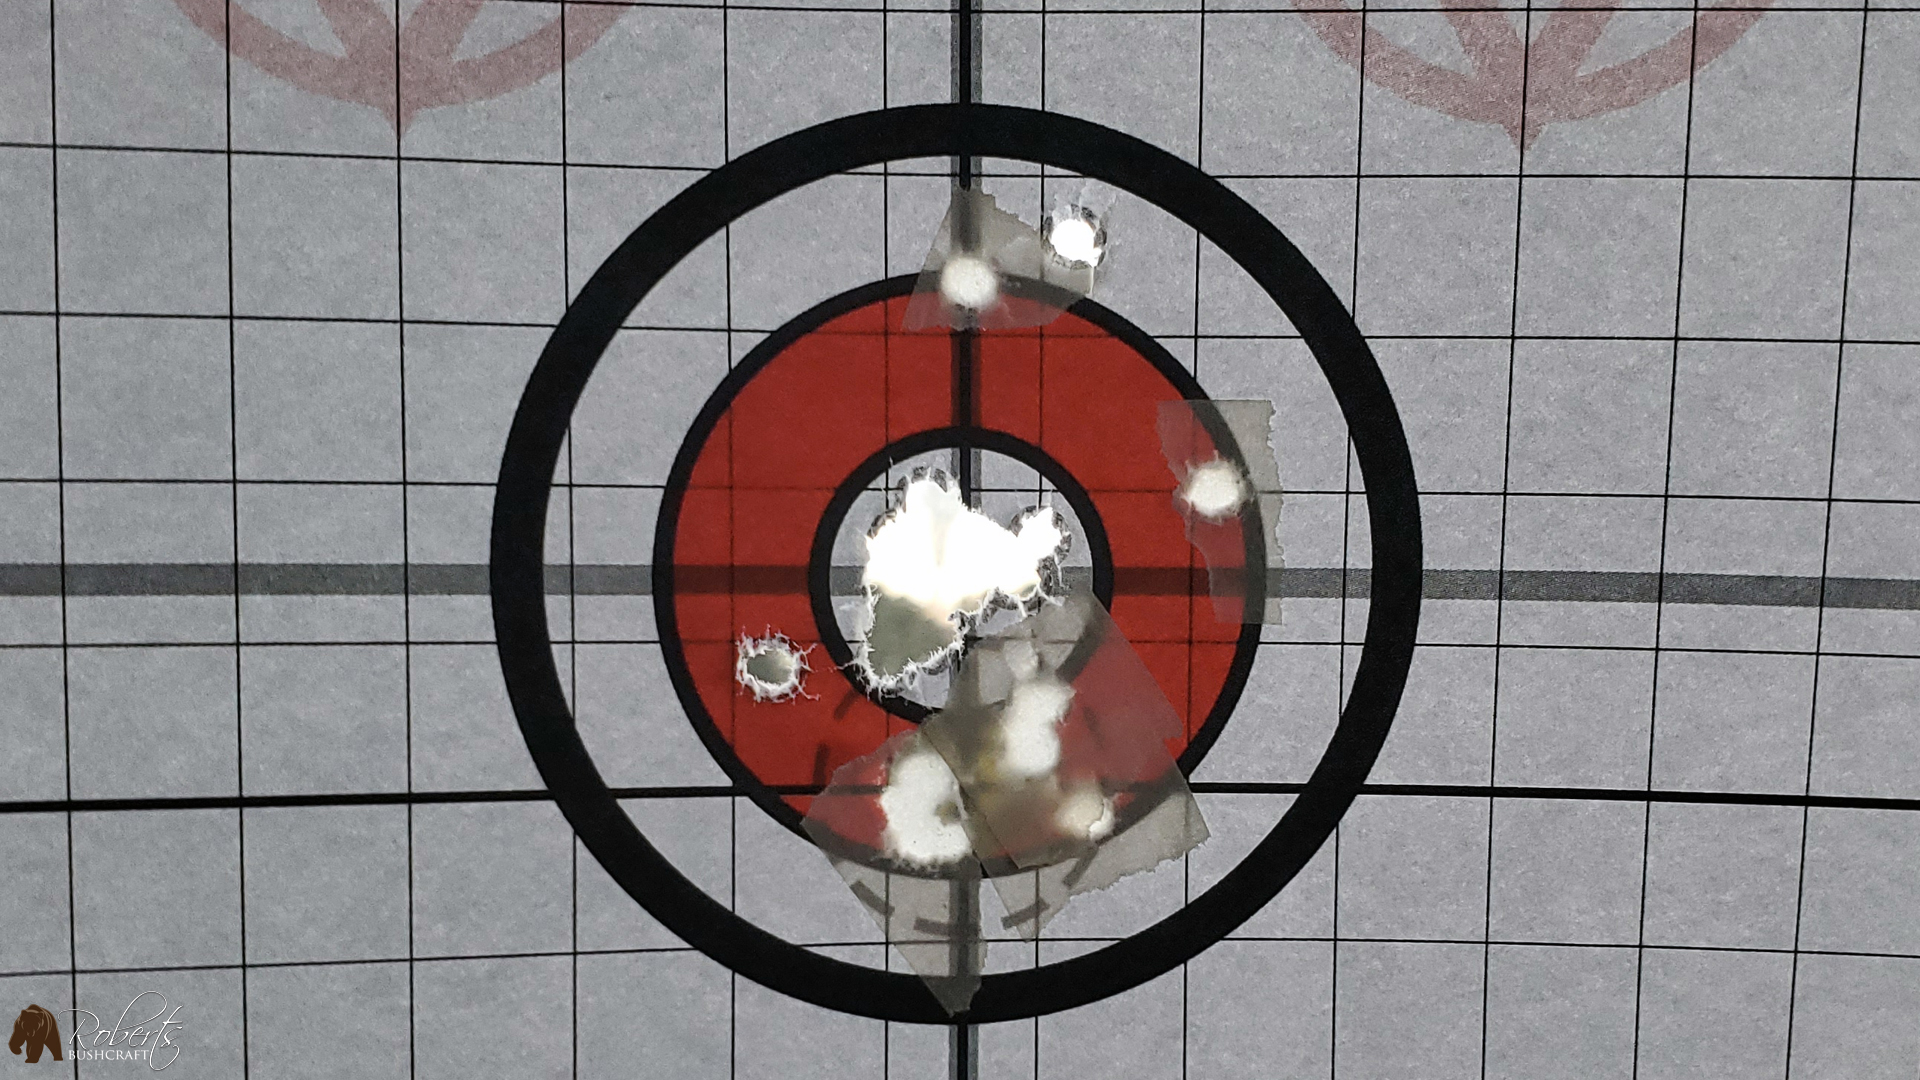 Vortex Crossfire II 4-12x44 on a Ruger 10/22 heavy bull barrel target results